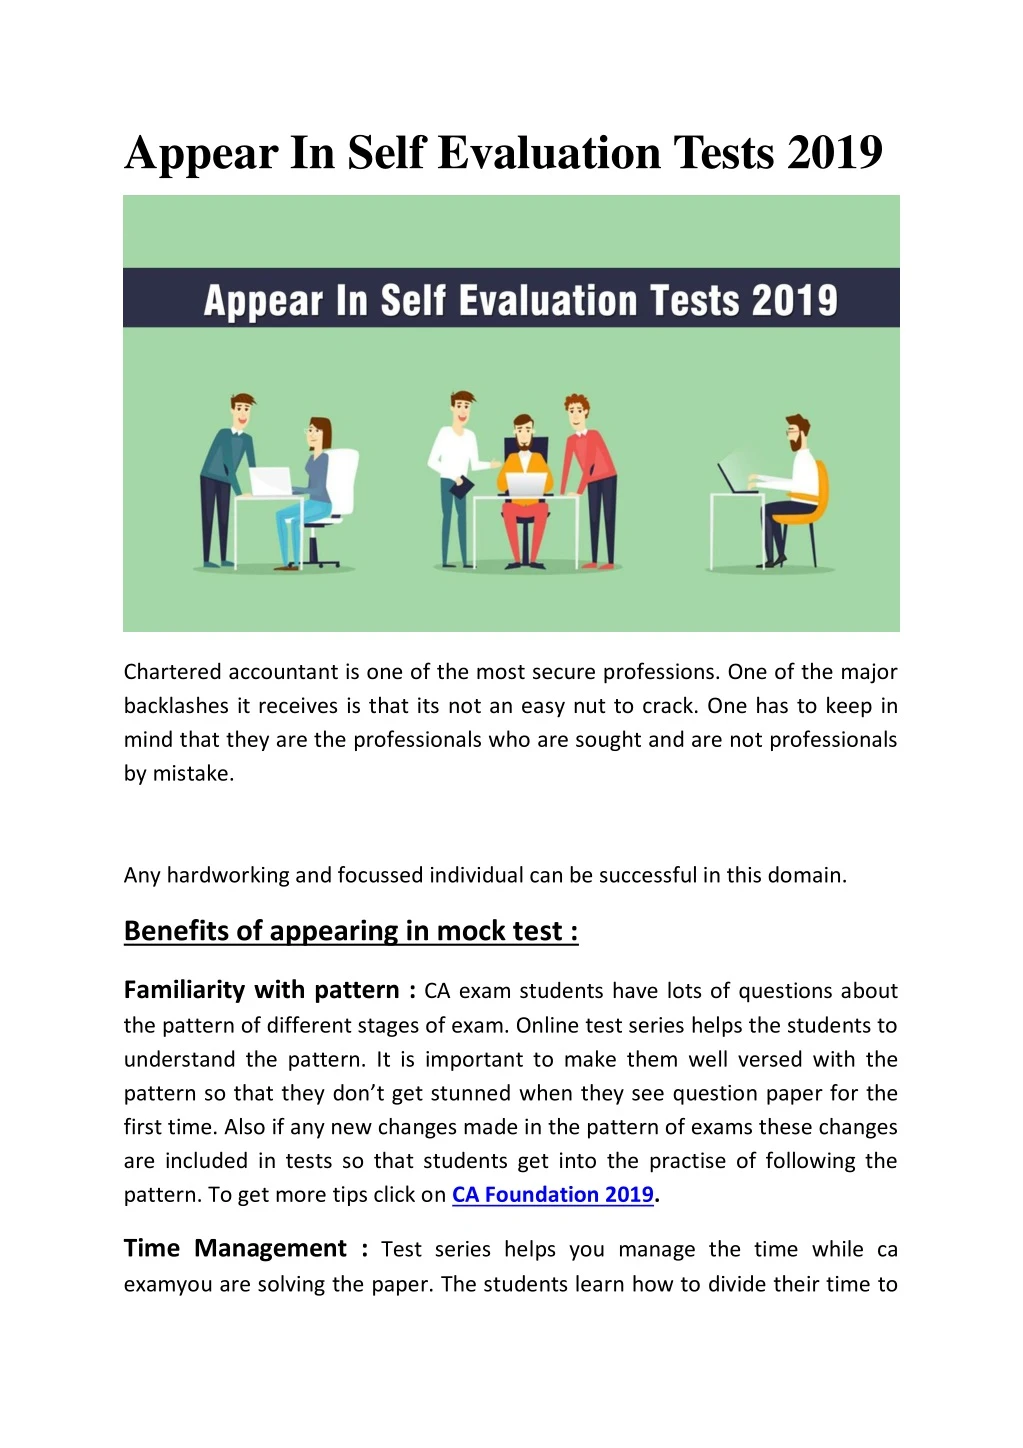 appear in self evaluation tests 2019